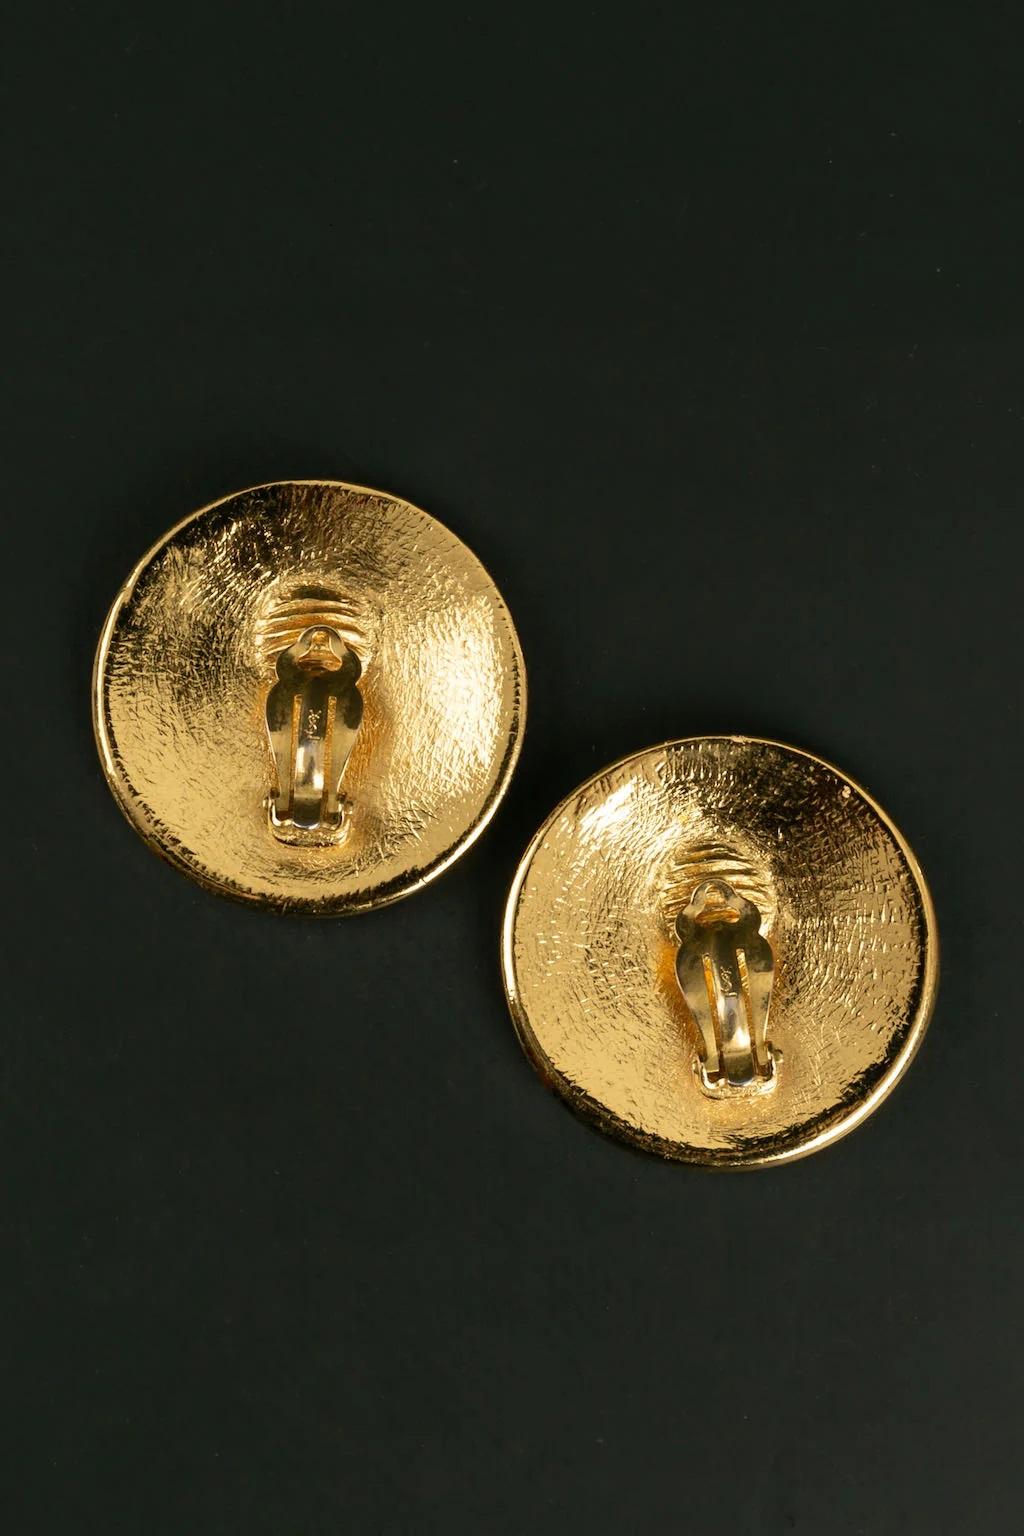 Yves Saint Laurent -Golden metal clip earrings featuring a shield.

Additional information:
Dimensions: Ø 4.3 cm

Condition: 
Very good condition

Seller Ref number: BO257